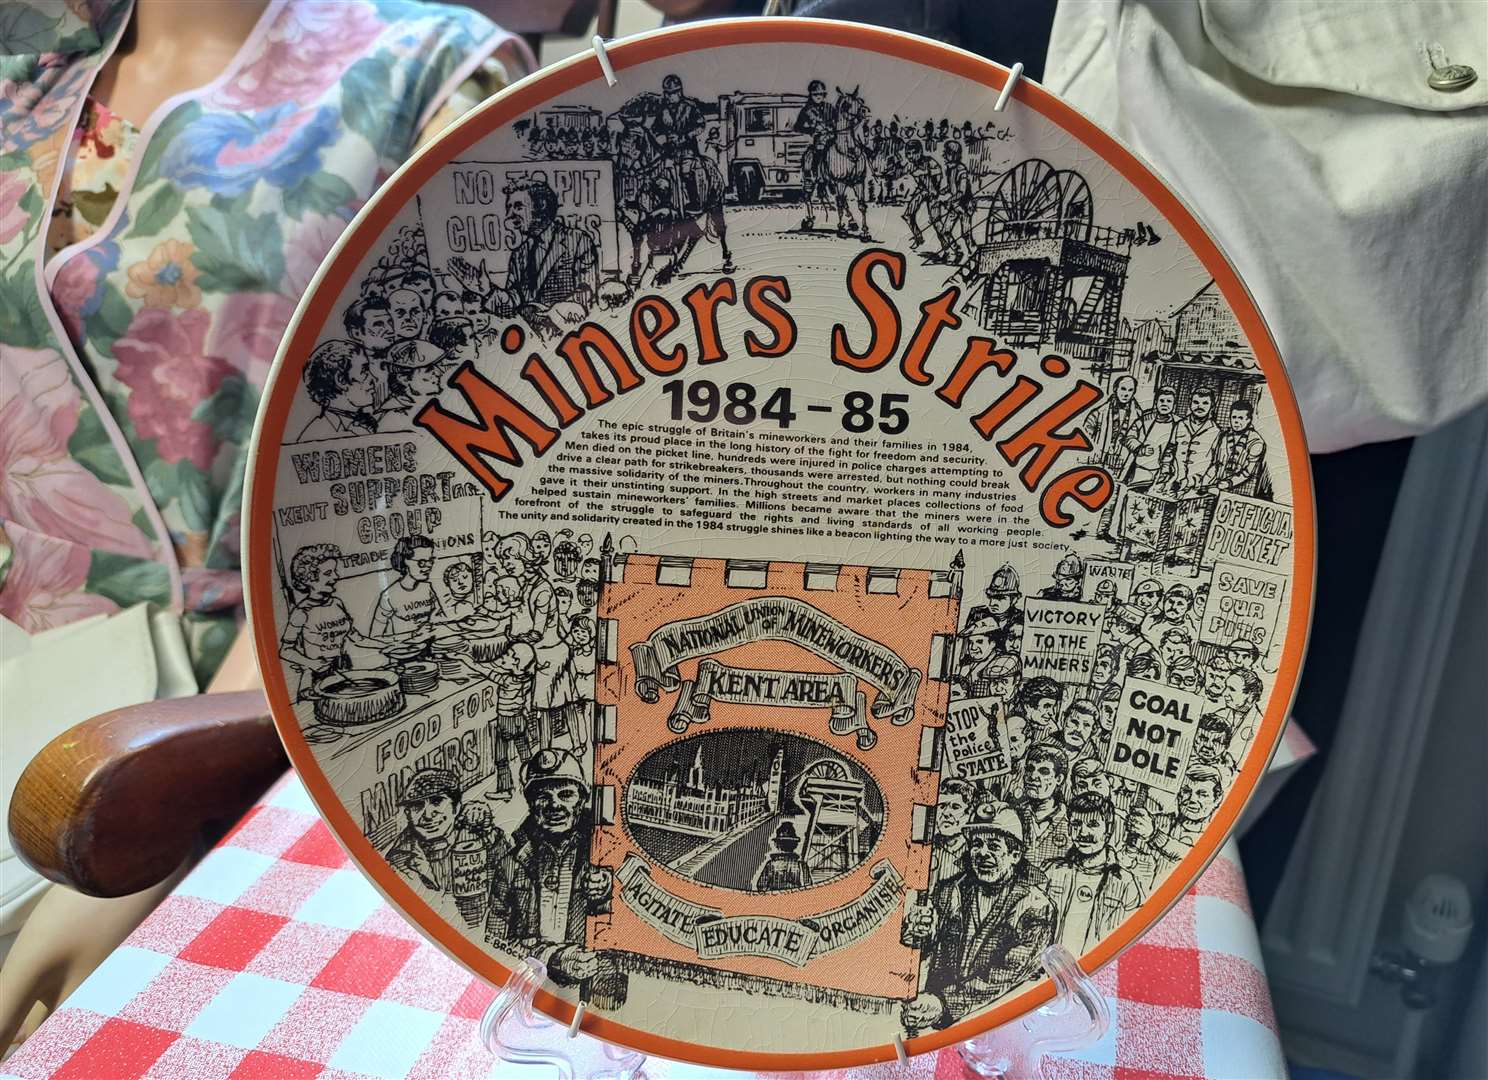 A souvenir plate of the strike at Aylesham Heritage Centre